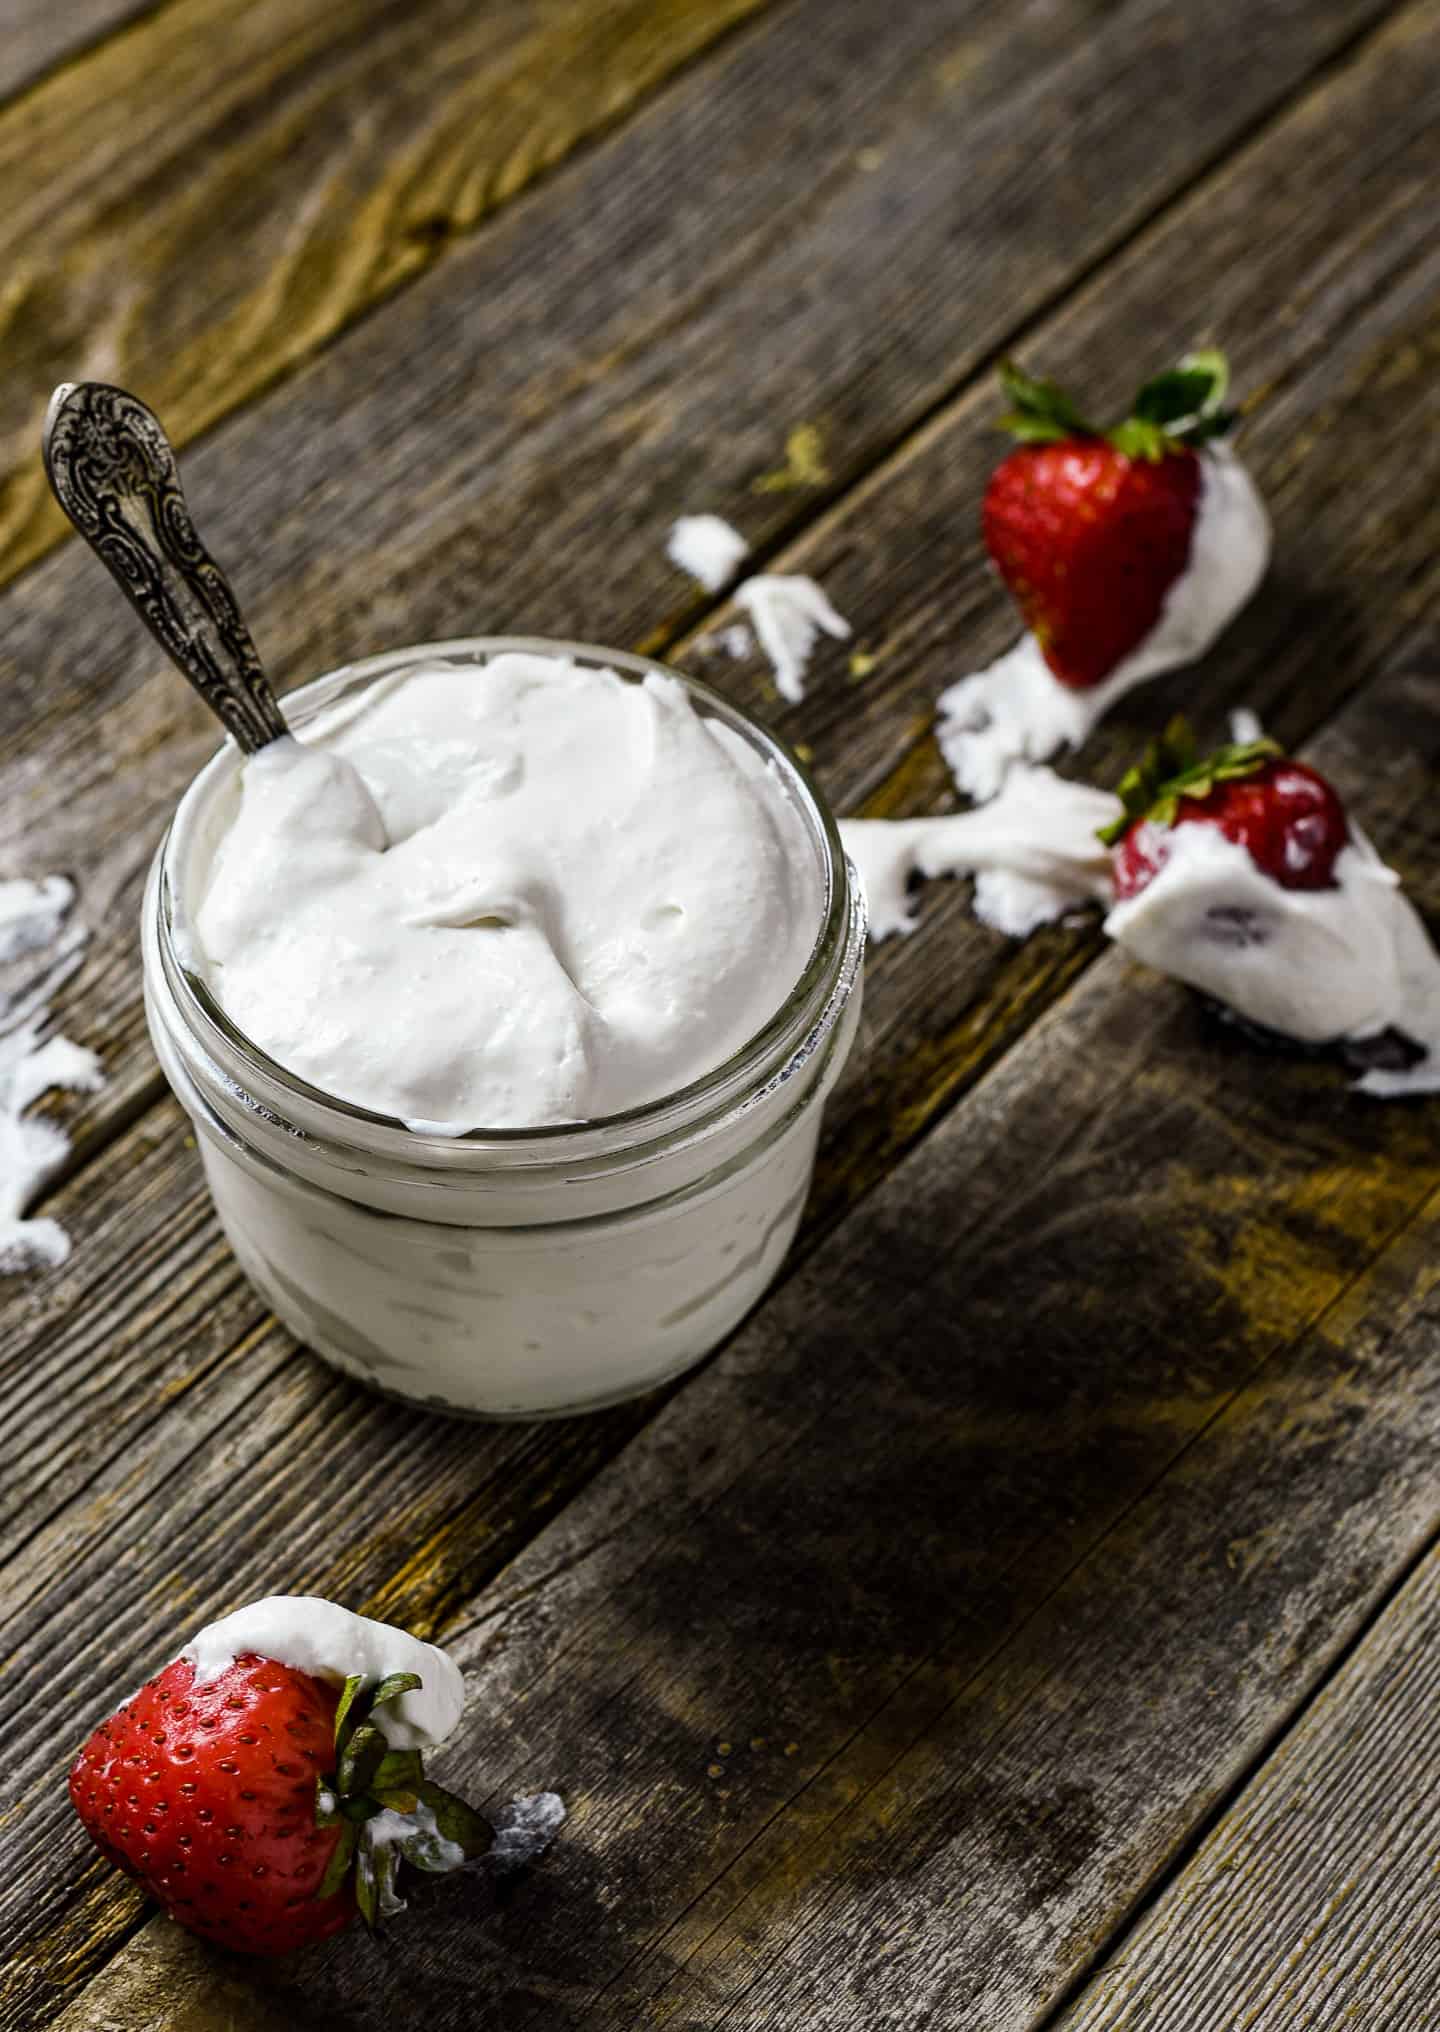 Jar of vegan whipped cream with starwberries.